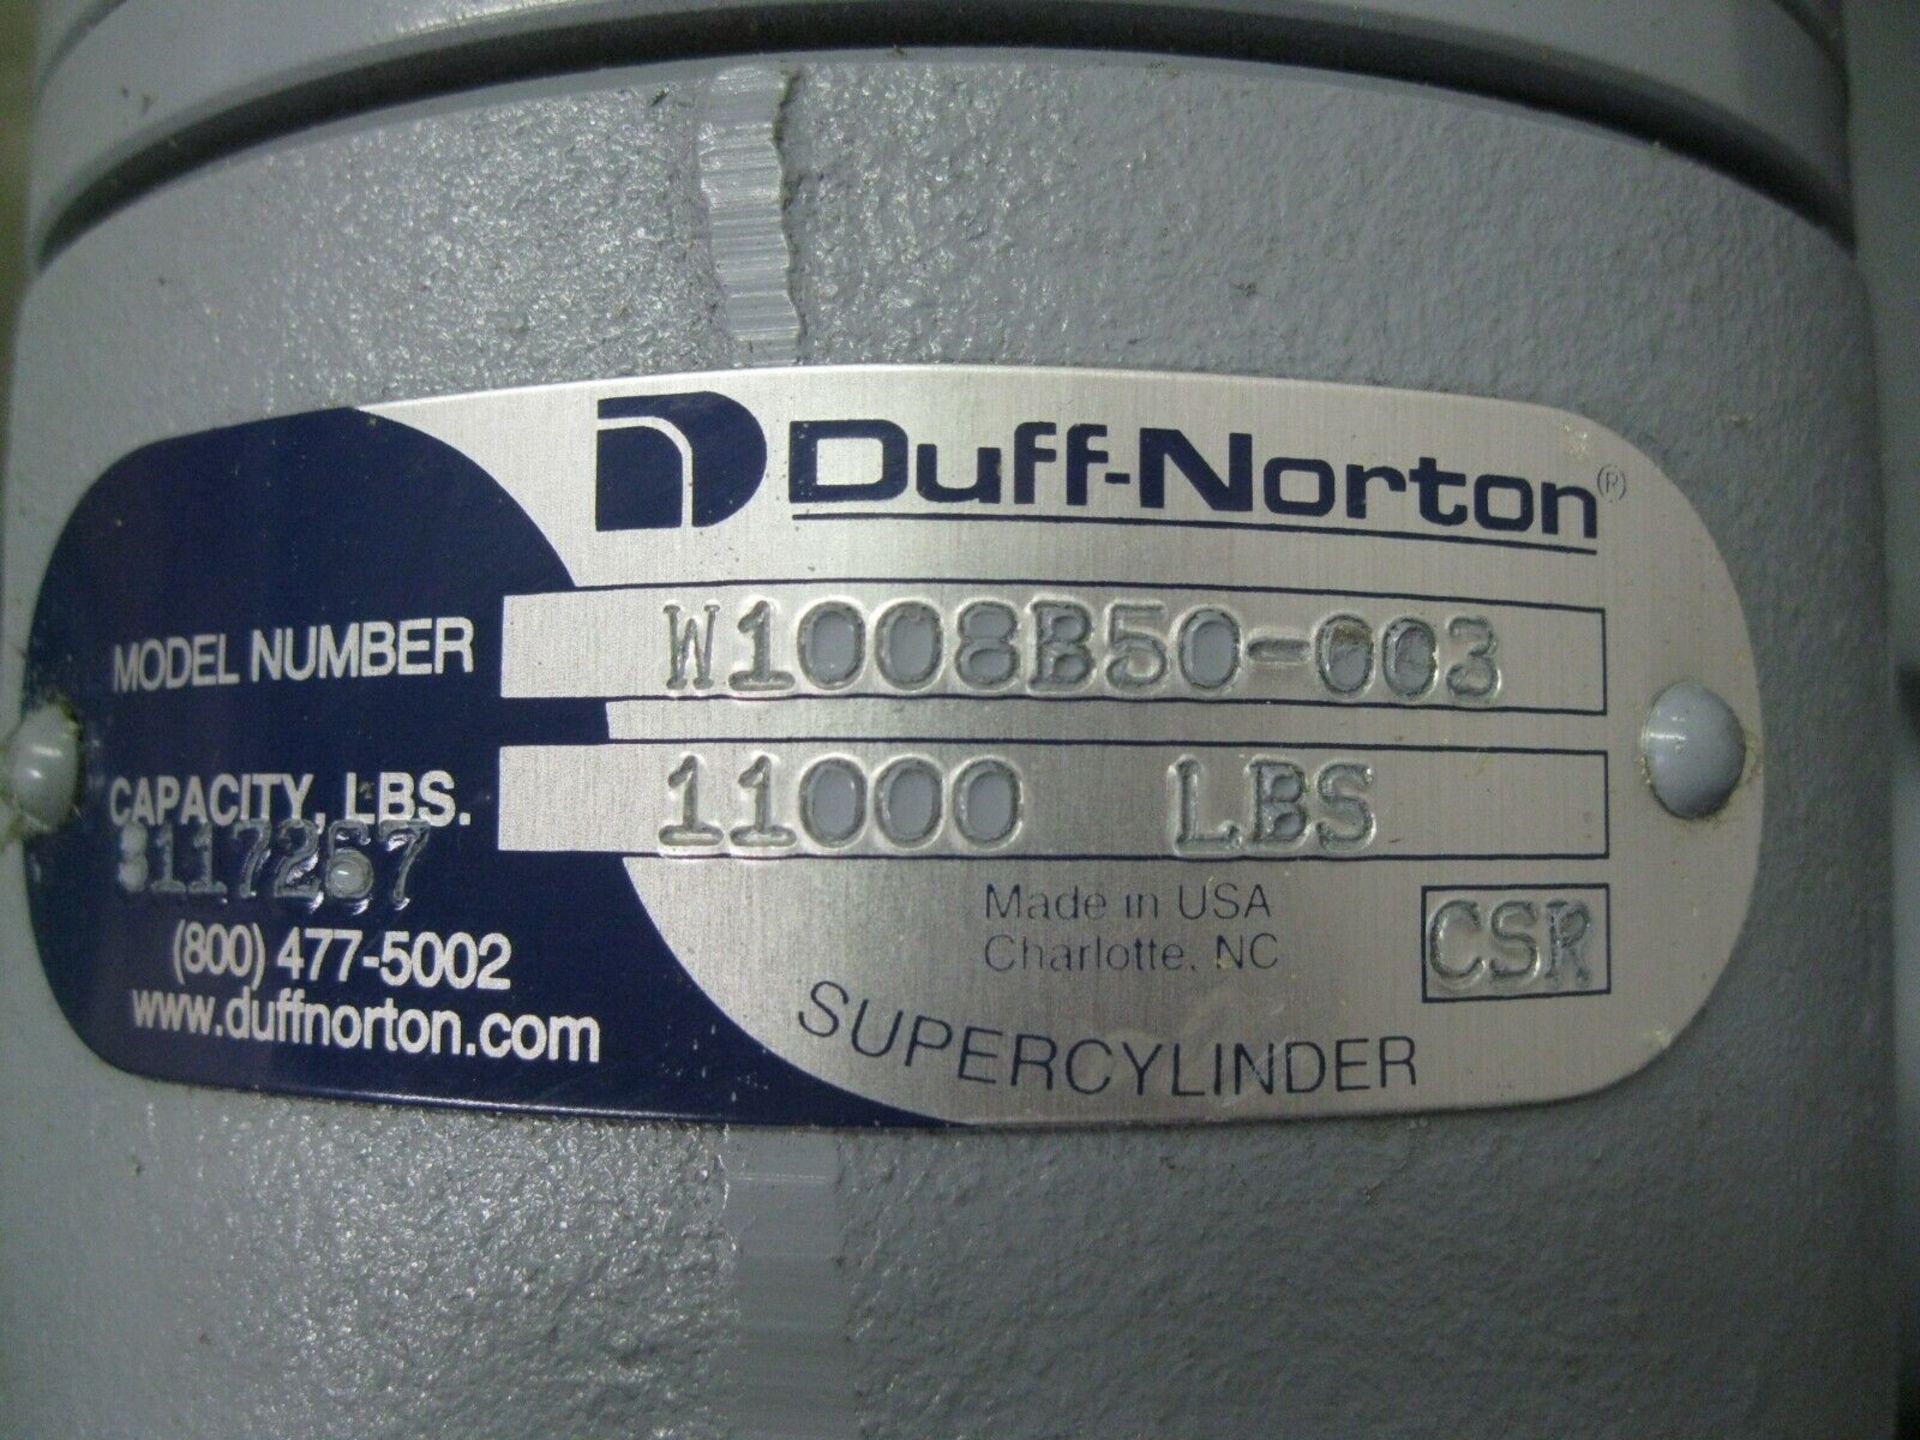 Duff-Norton W1008B50-003 SuperCylinder Linear Actuator 11,000 LBS NEW(Located Springfield, NH) ( - Image 2 of 7